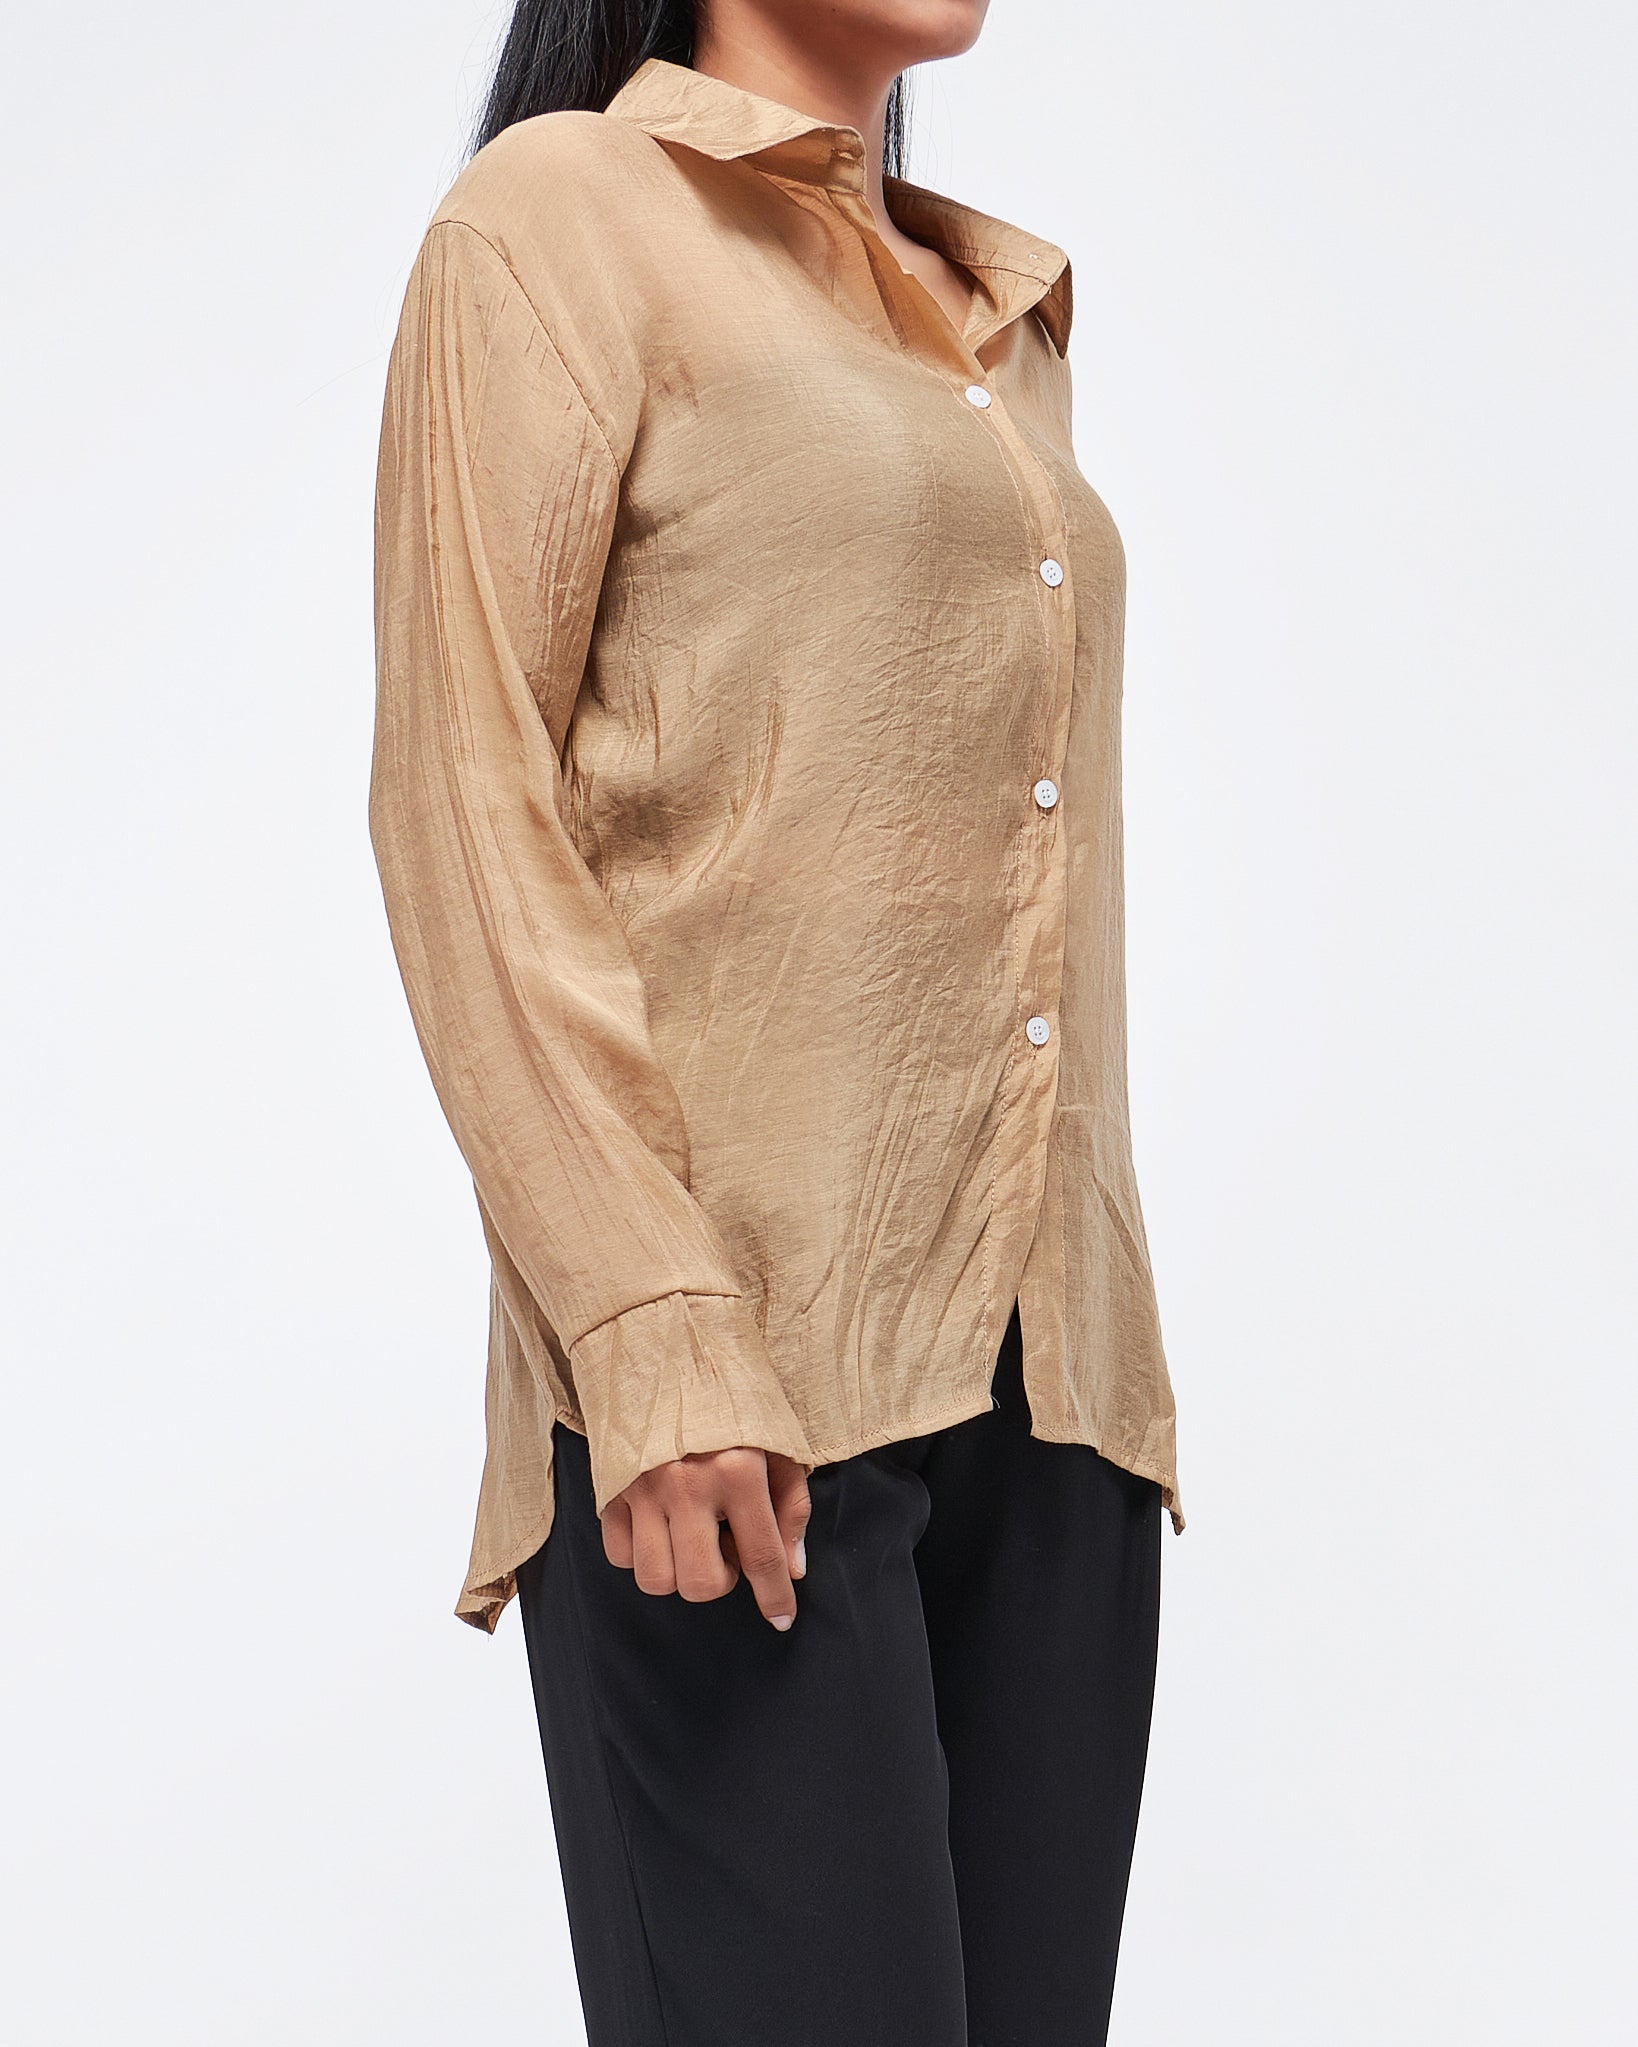 MOI OUTFIT-Cross Back Lady Shirts Long Sleeve 14.90